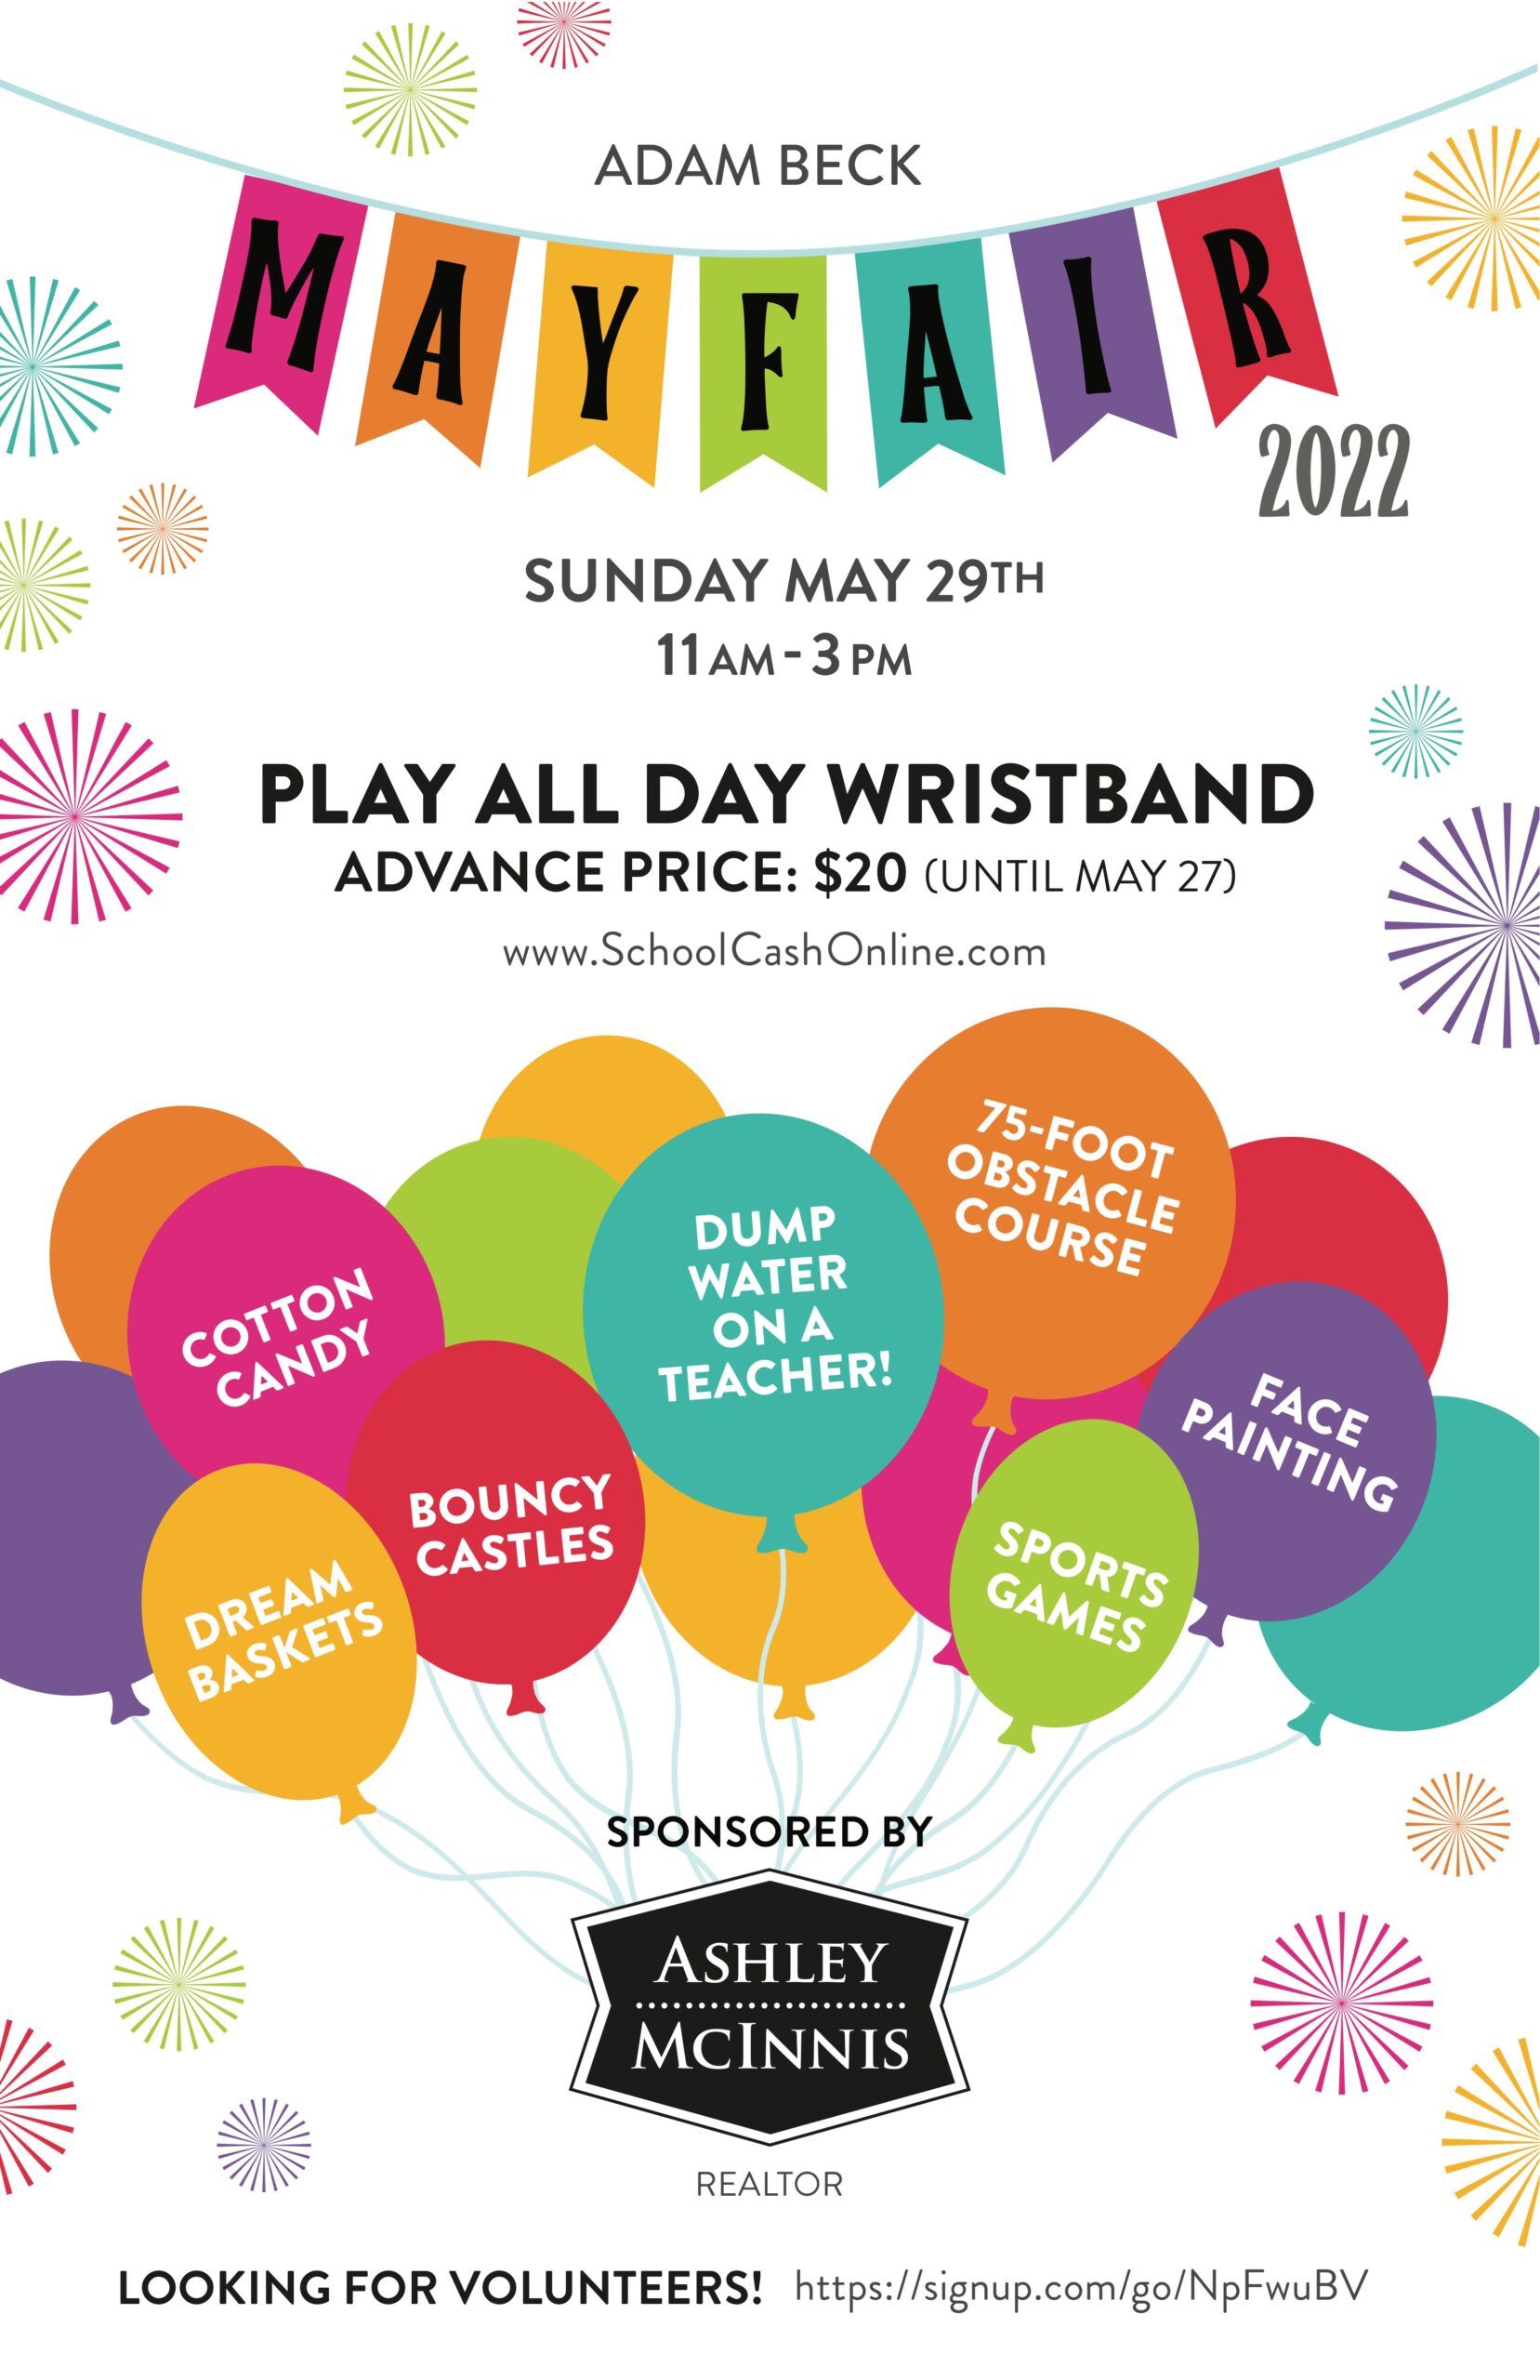 Adam Beck Mayfair poster. Date: Sunday, May 29. Time: 11am to 3pm. Heading: play all day wristband. Advance price: $20 until May 27